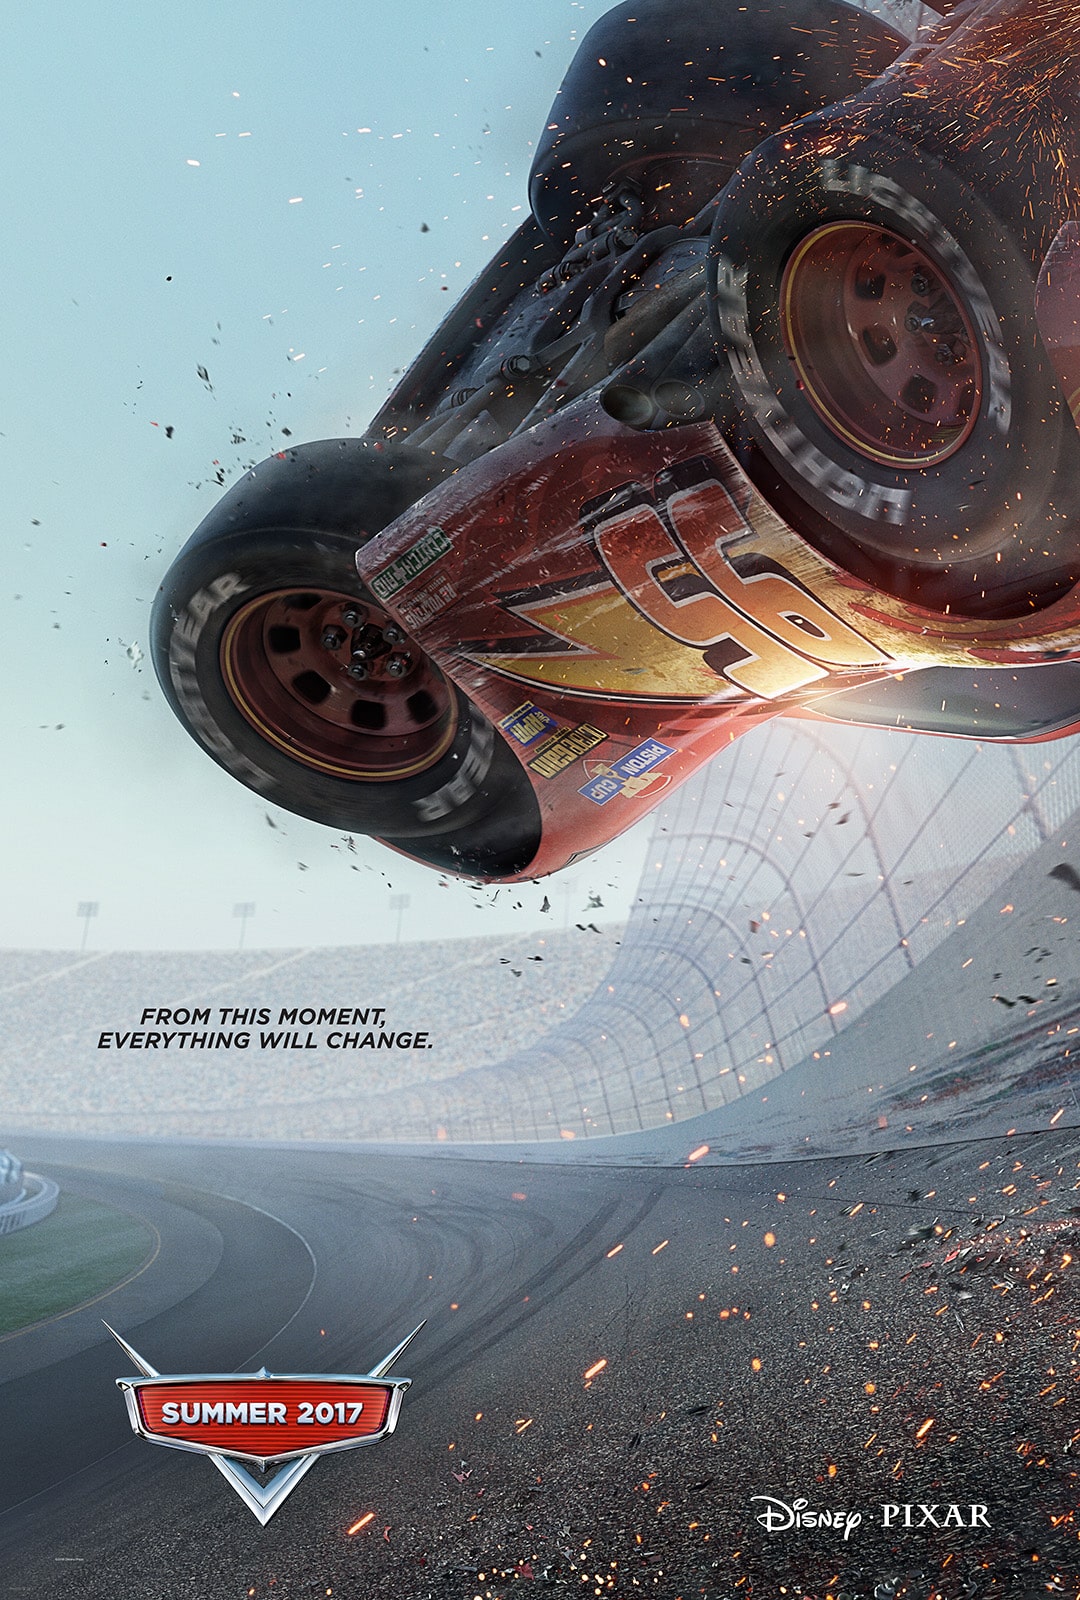 A Day at Sonoma Raceway + NEW Trailer for Cars 3! #Cars3Event #SonomaRaceway